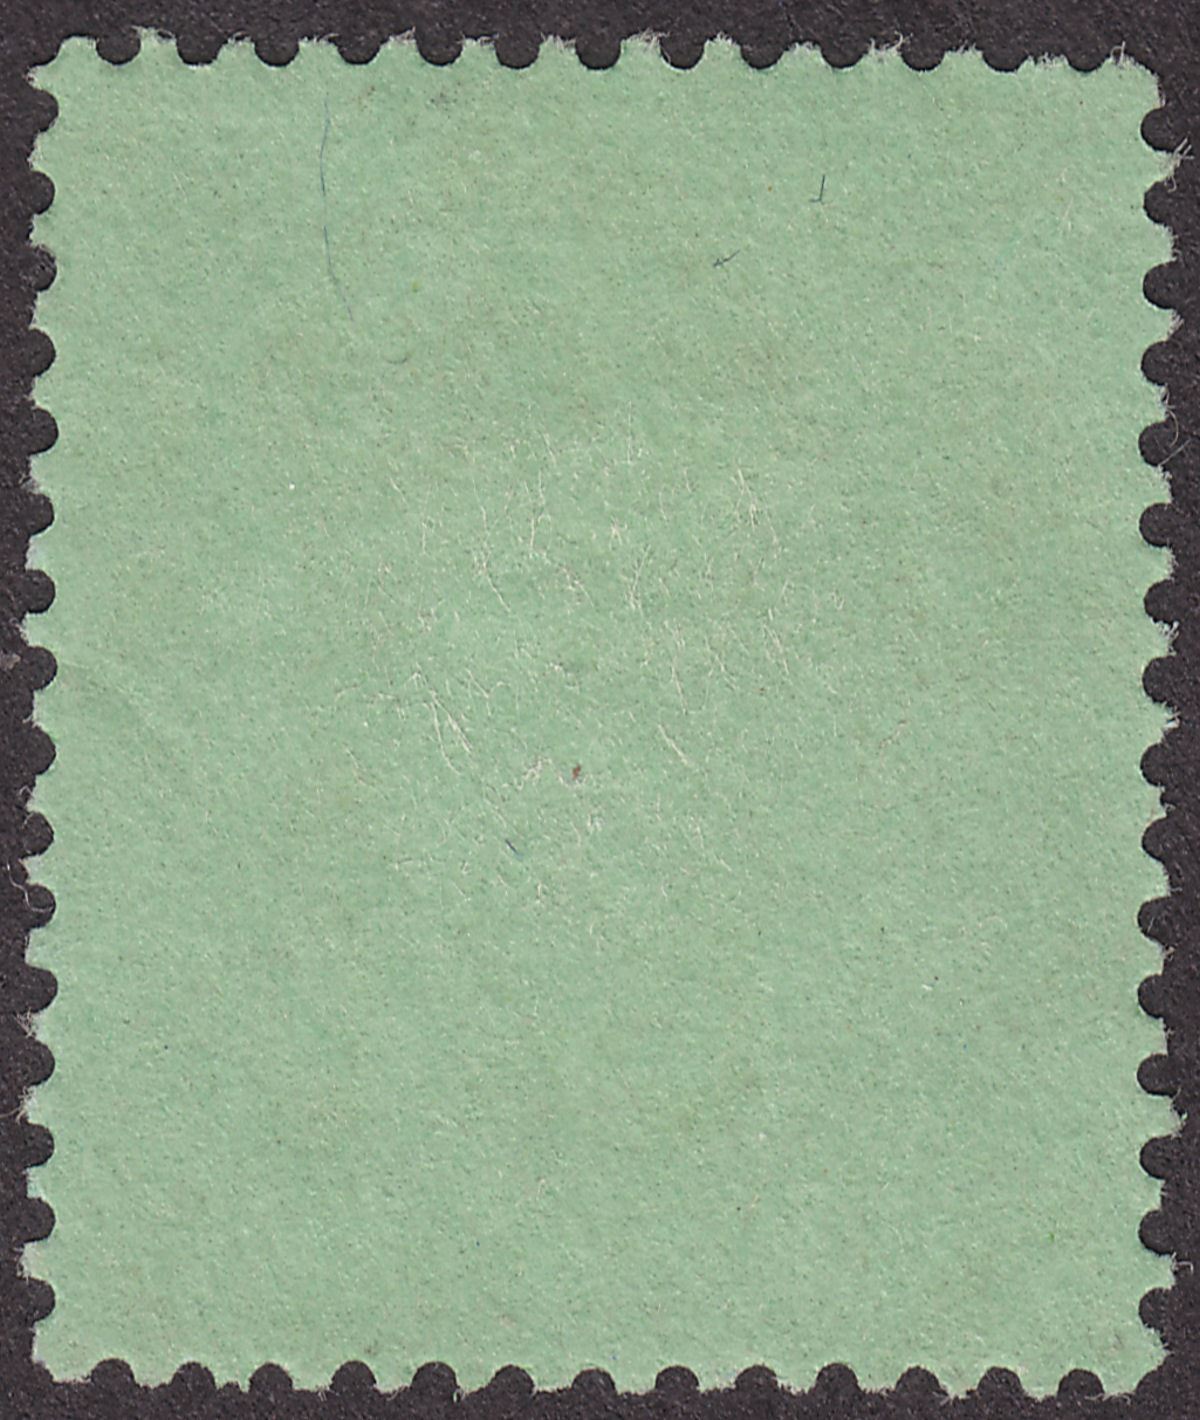 Malaya BMA Administration 1945 KGVI $5 Green + Red Used SG17 cat £160 surf flt